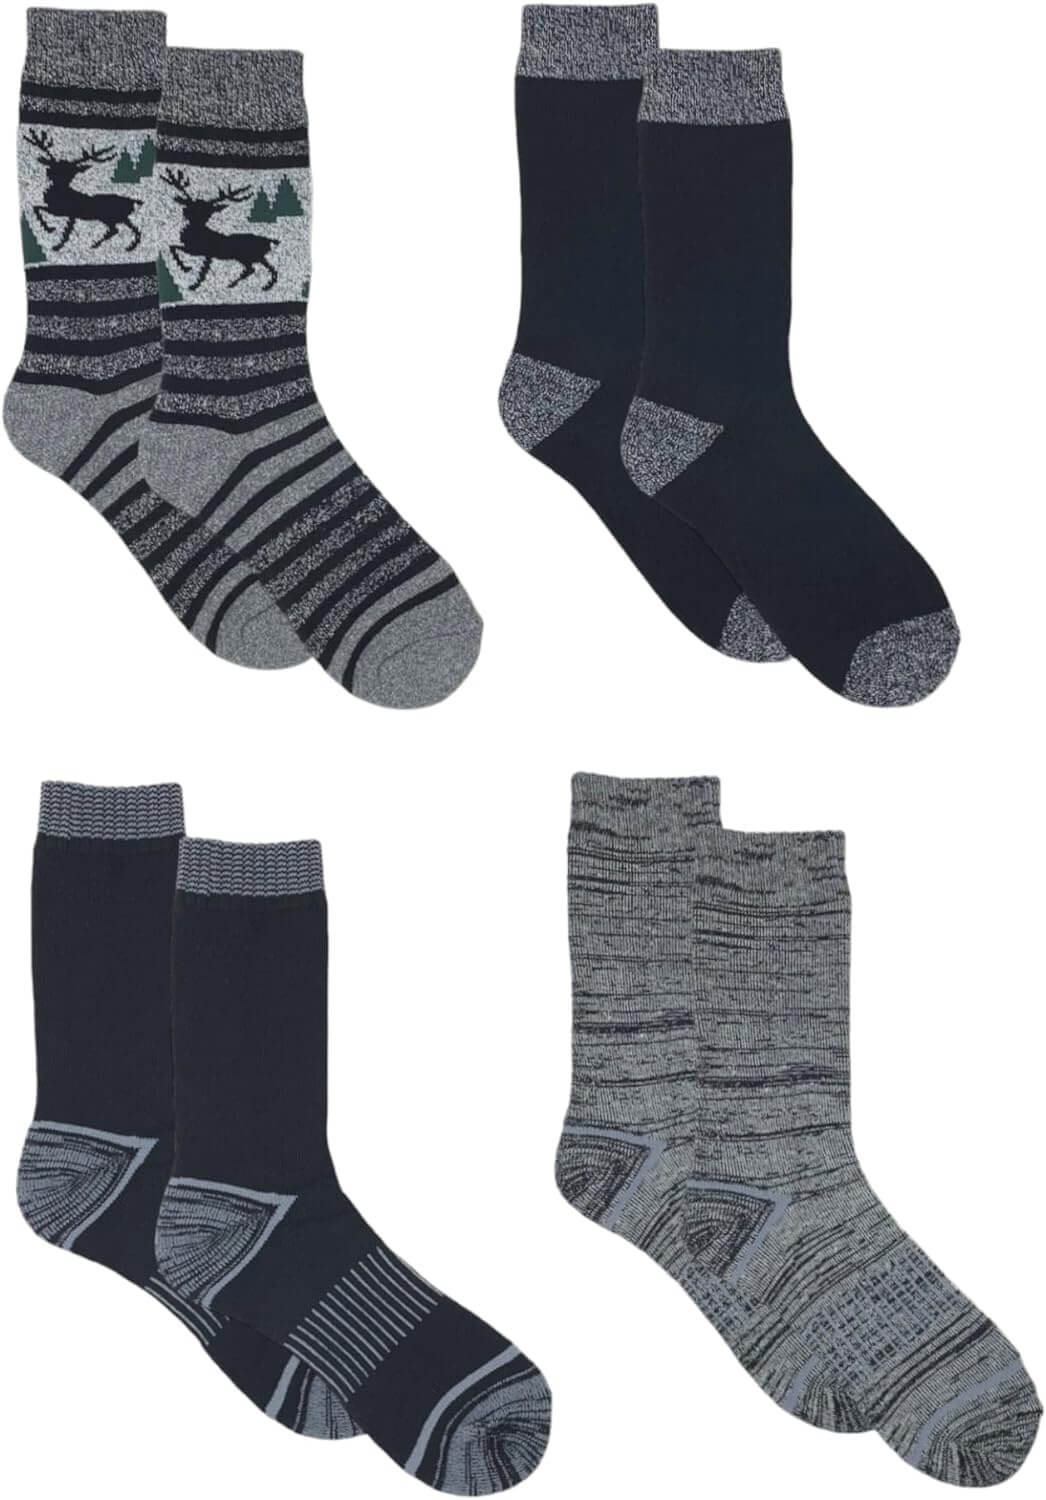 Shop The Latest >Columbia Women's 4 Pack Moisture Control Crew Socks > *Only $47.24*> From The Top Brand > *Columbial* > Shop Now and Get Free Shipping On Orders Over $45.00 >*Shop Earth Foot*